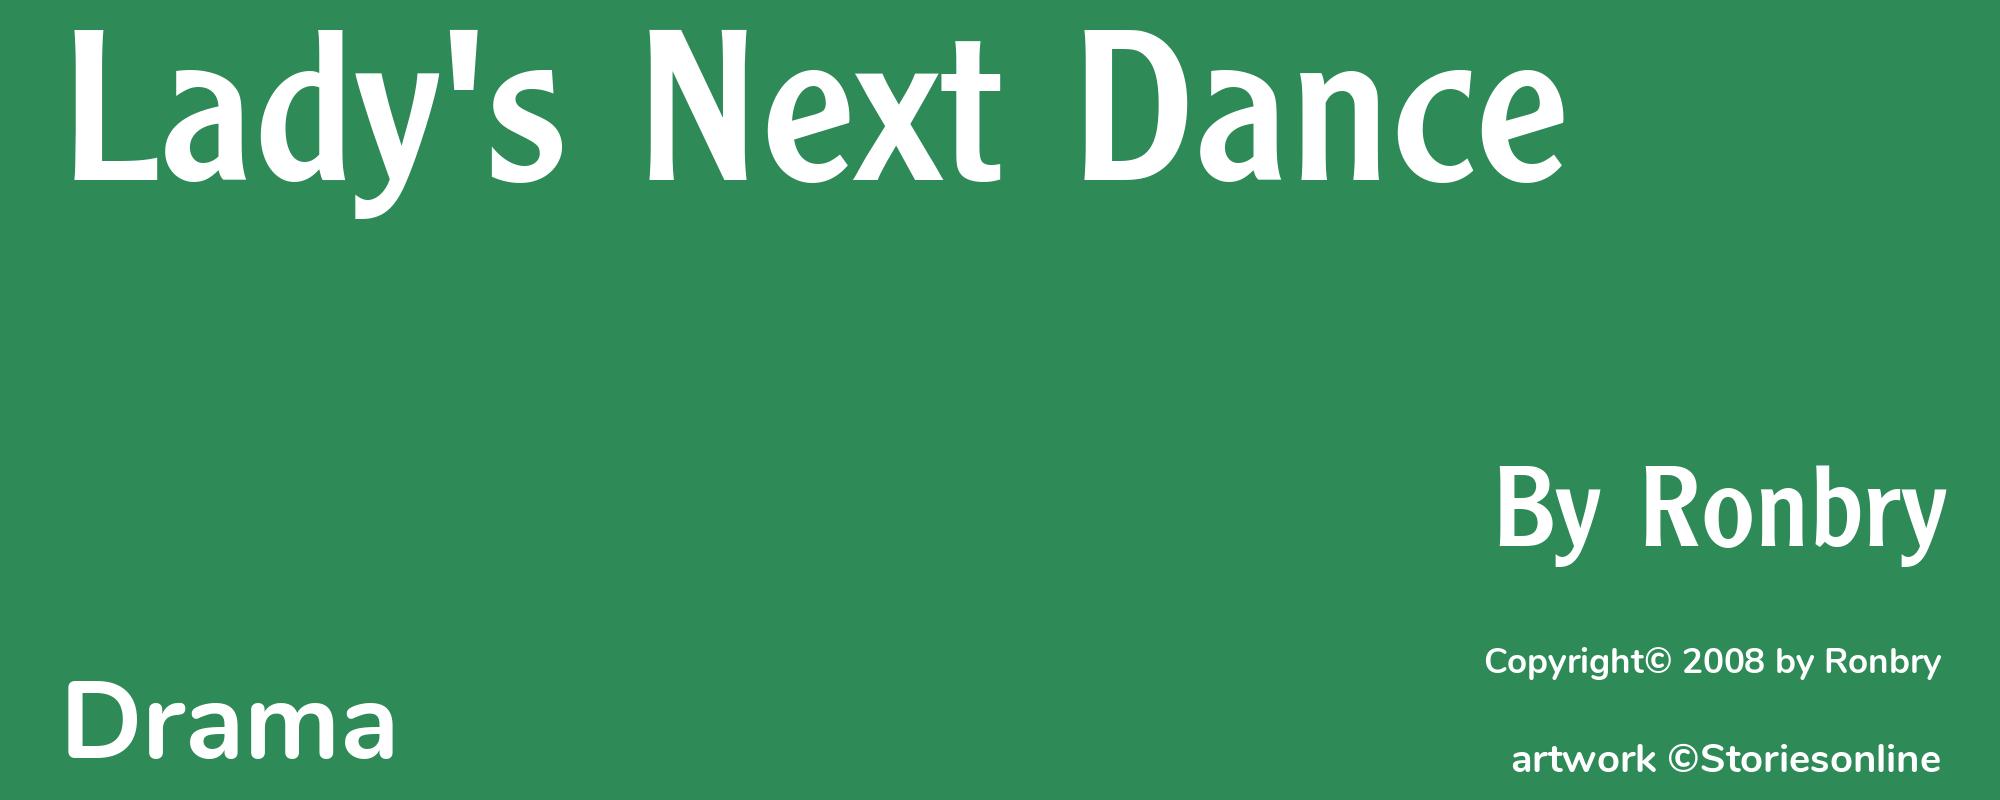 Lady's Next Dance - Cover